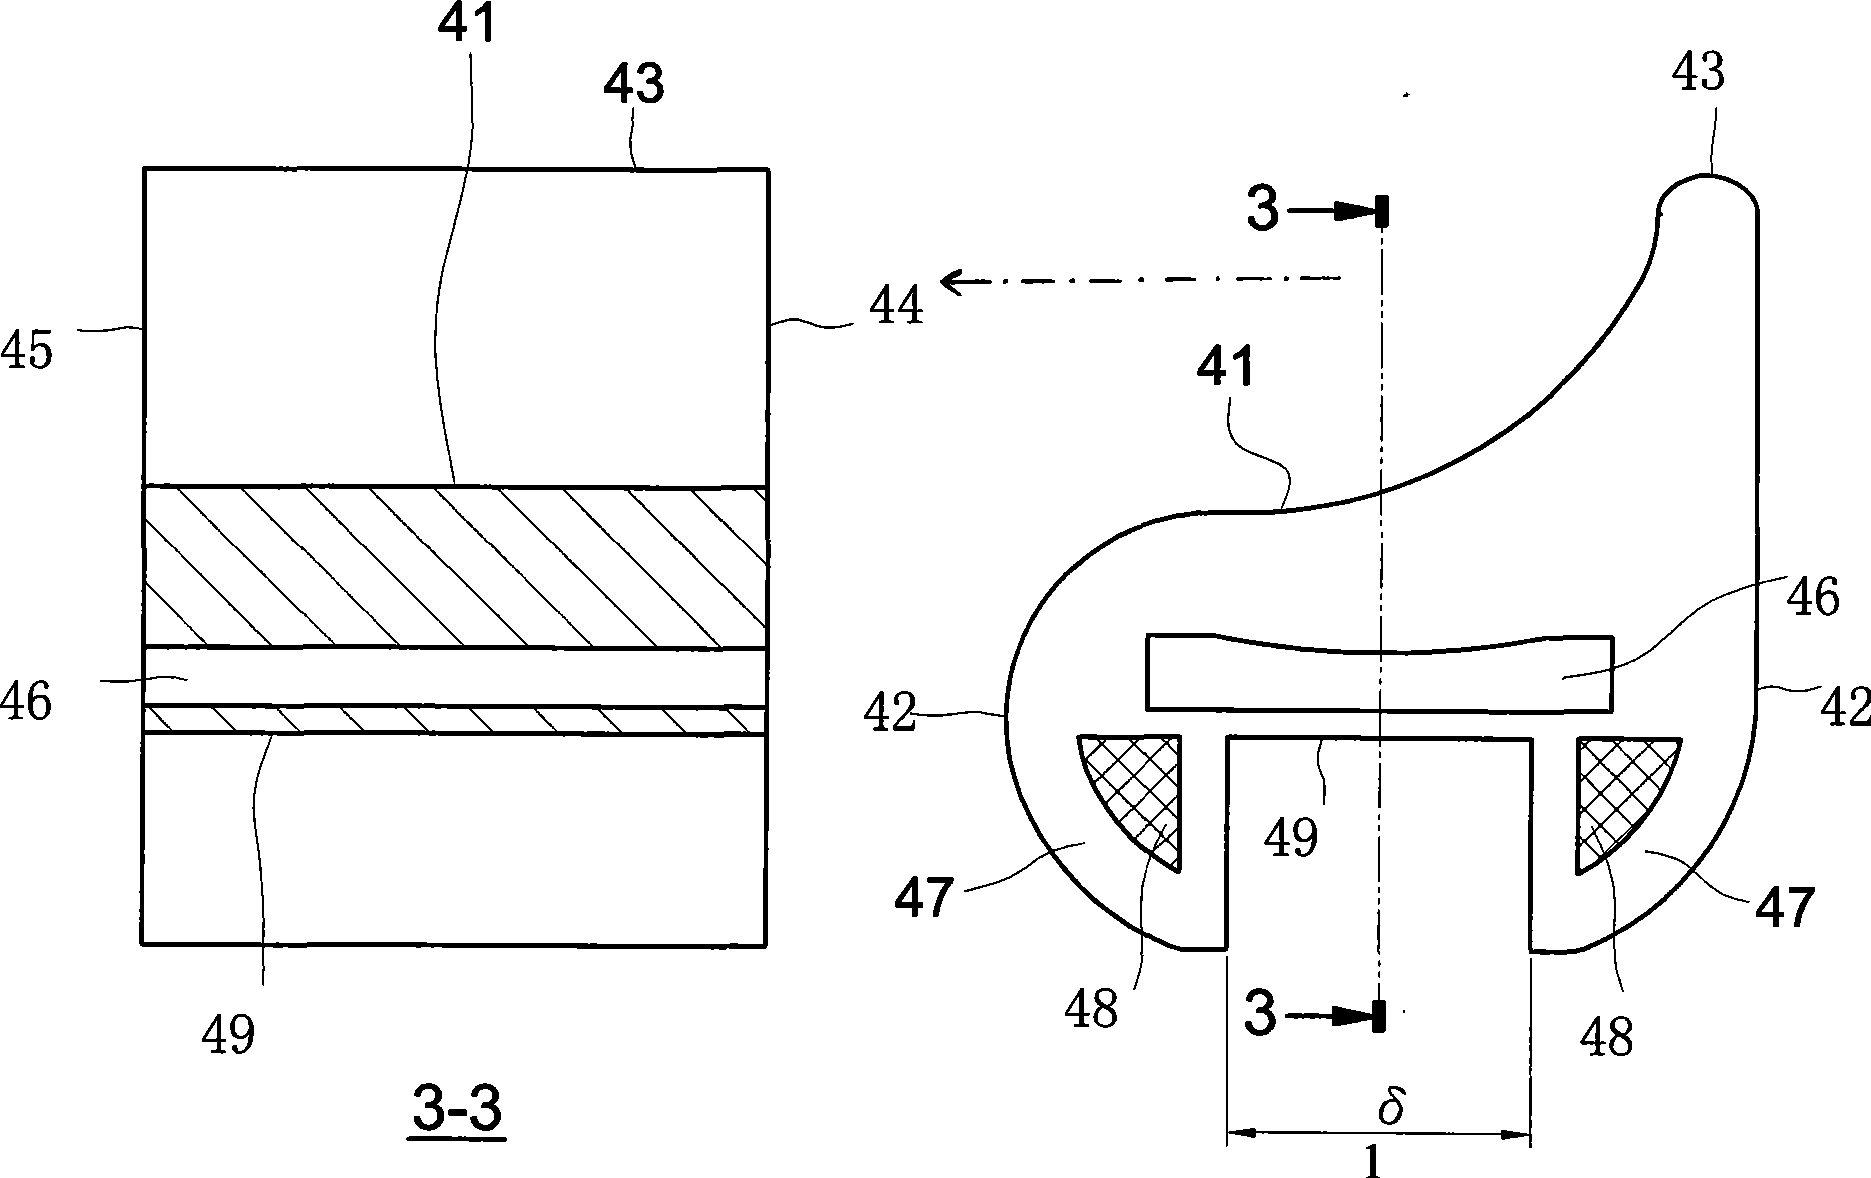 Structure of permutation and combination type windshield wiper